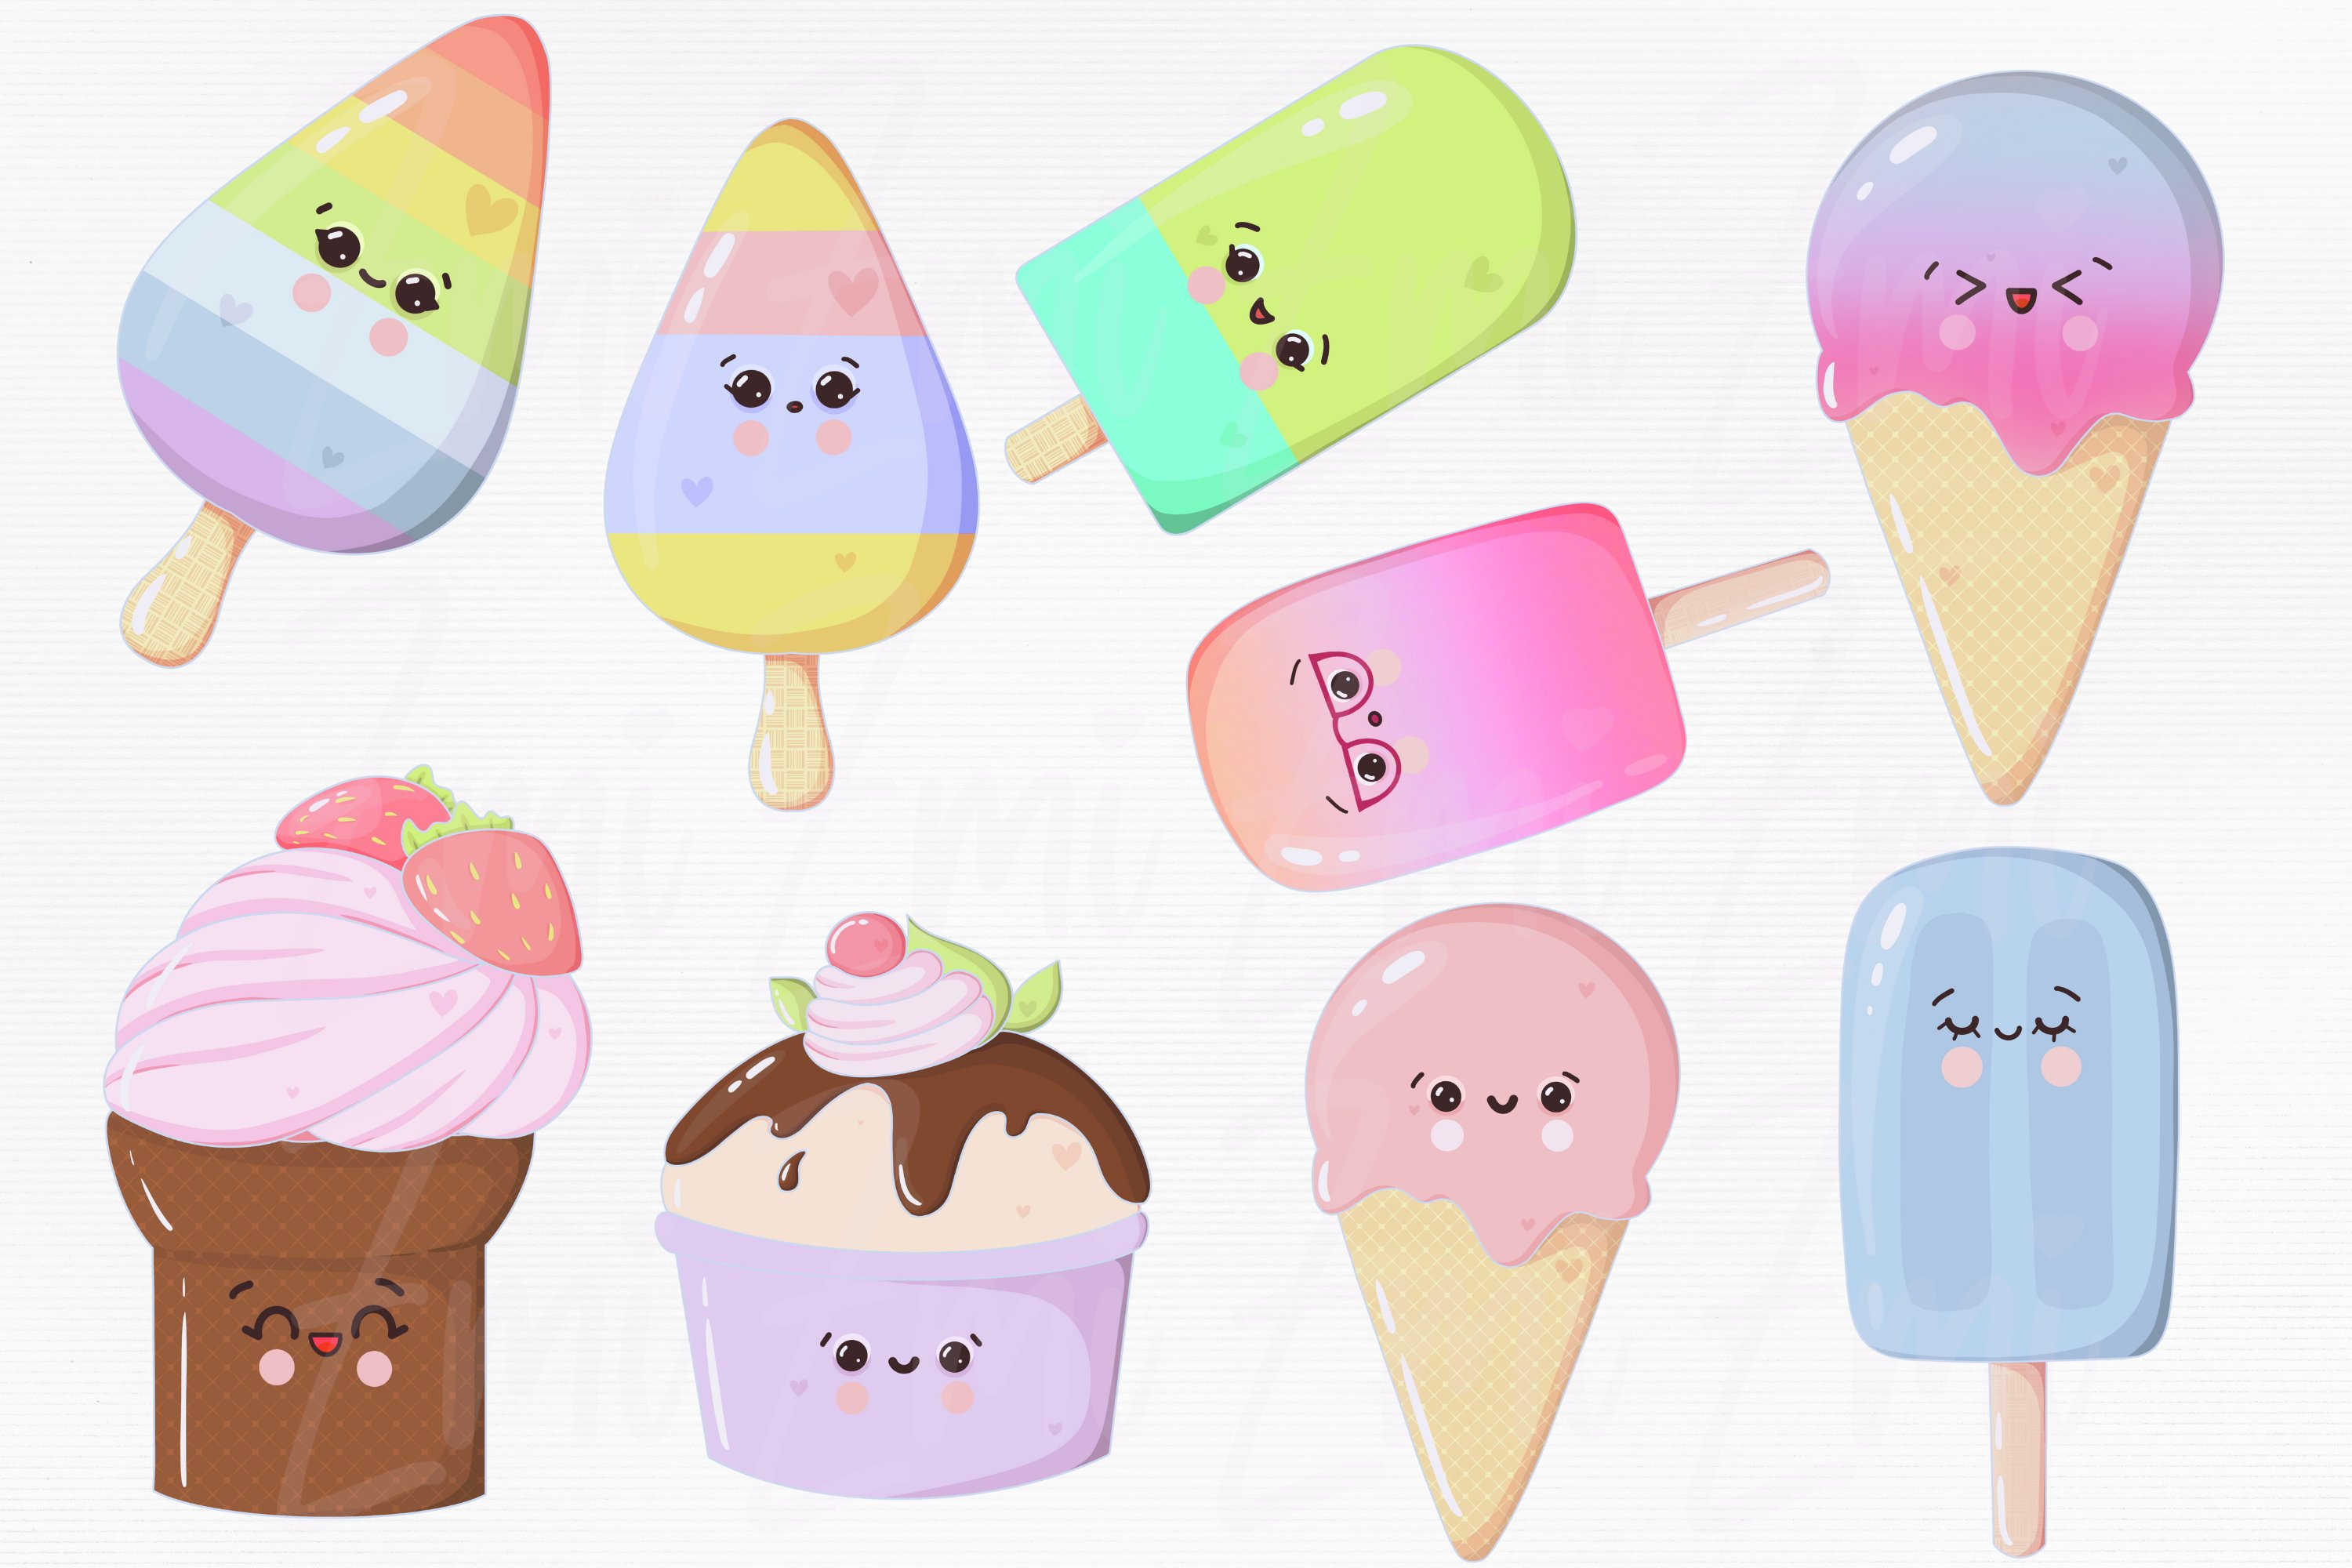 Colorful set of different cute ice cream illustrations on a gray background.